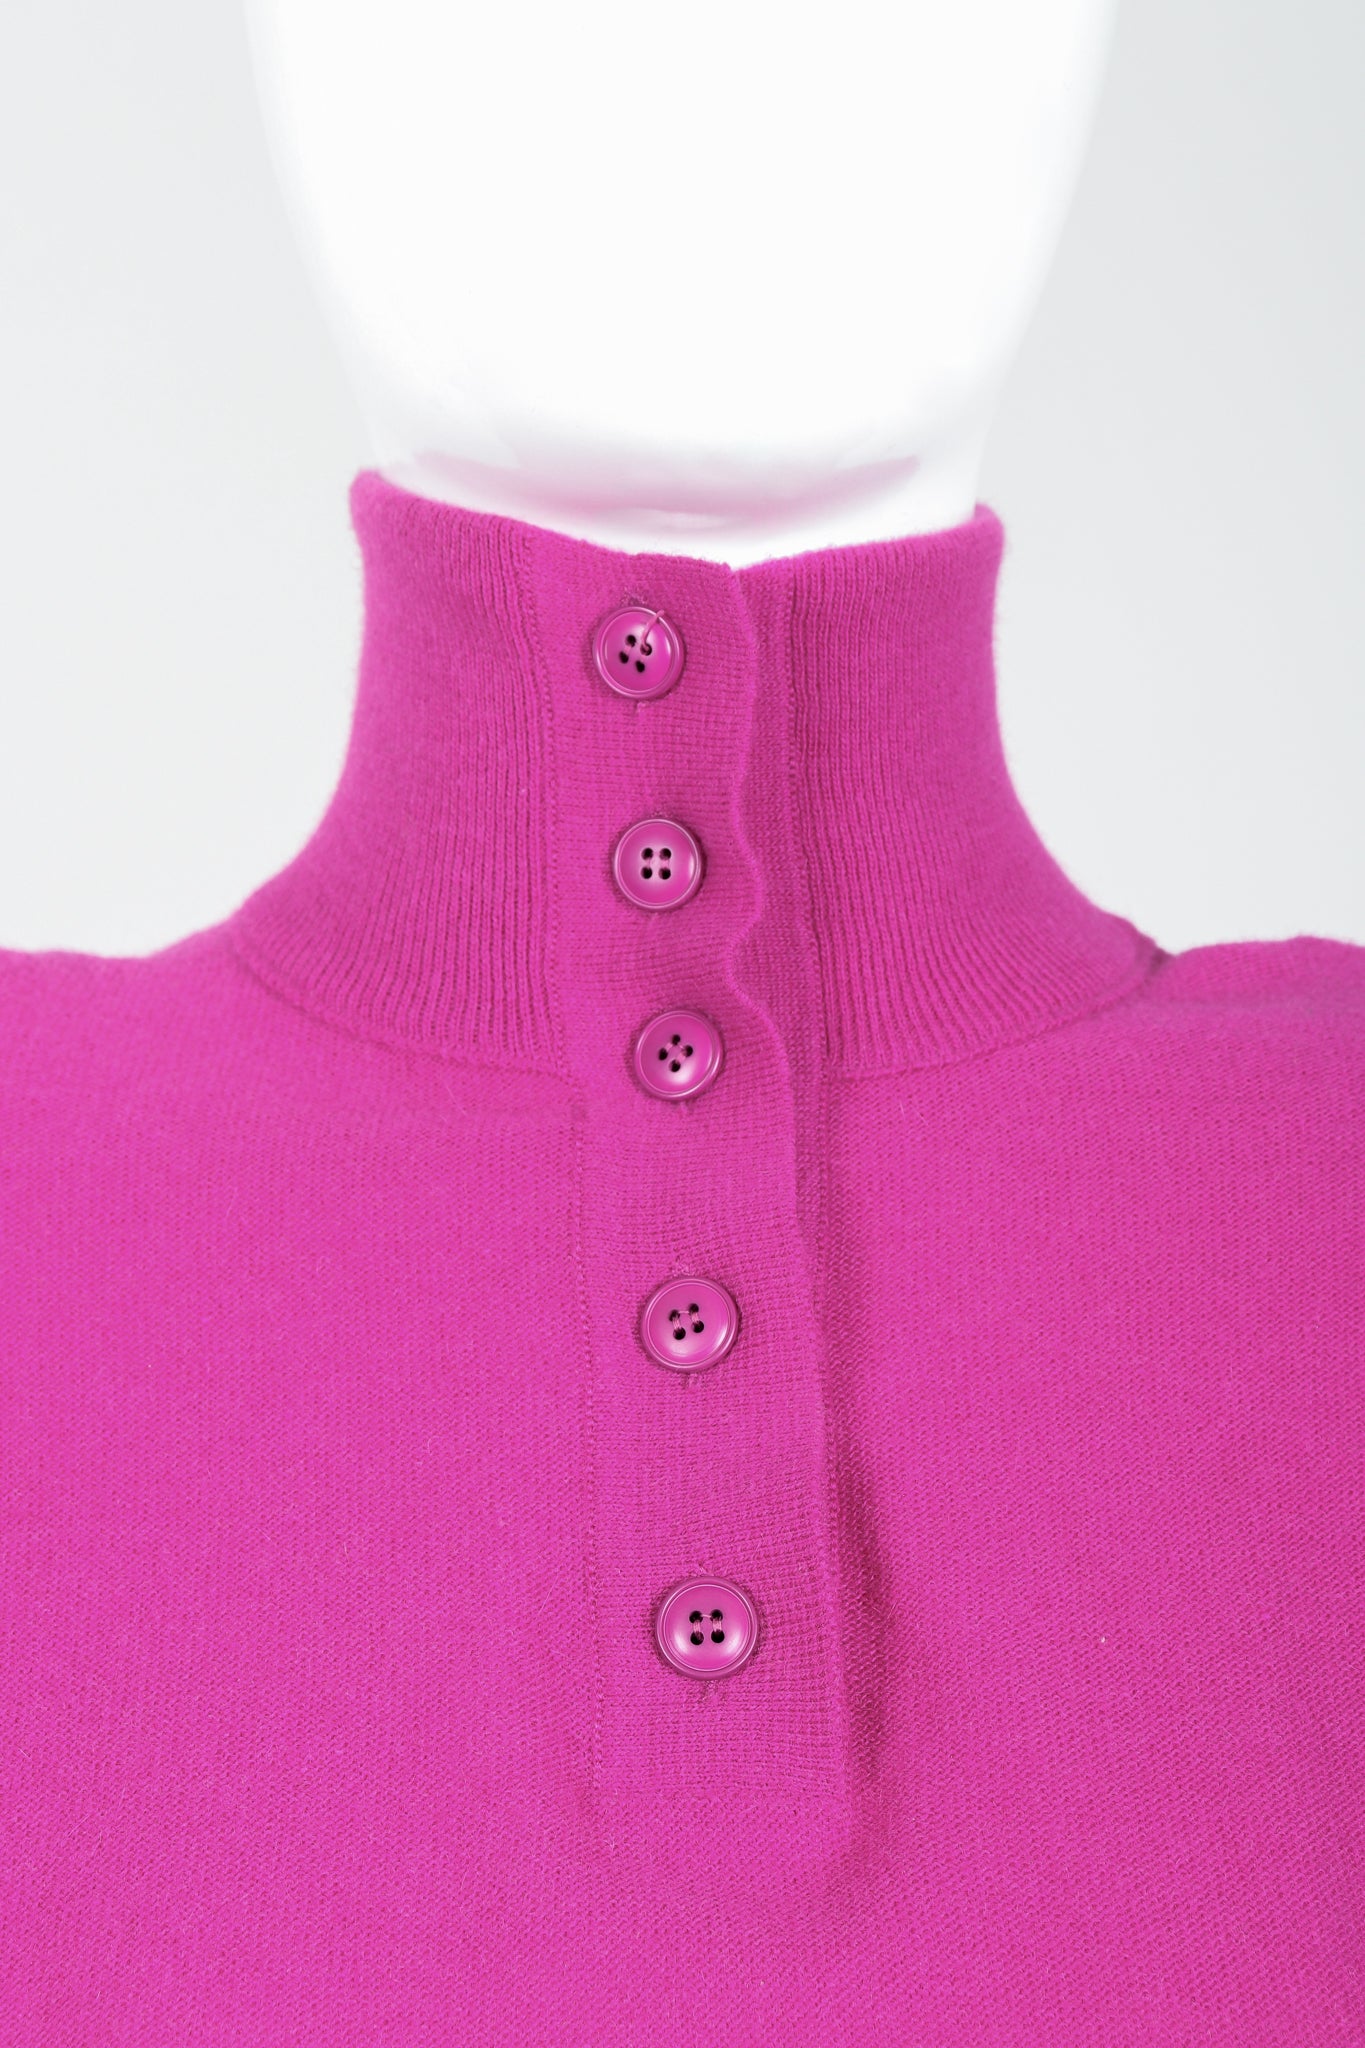 Vintage Sonia Rykiel Magenta Knit Popover Sweater on Mannequin Neck Detail at Recess